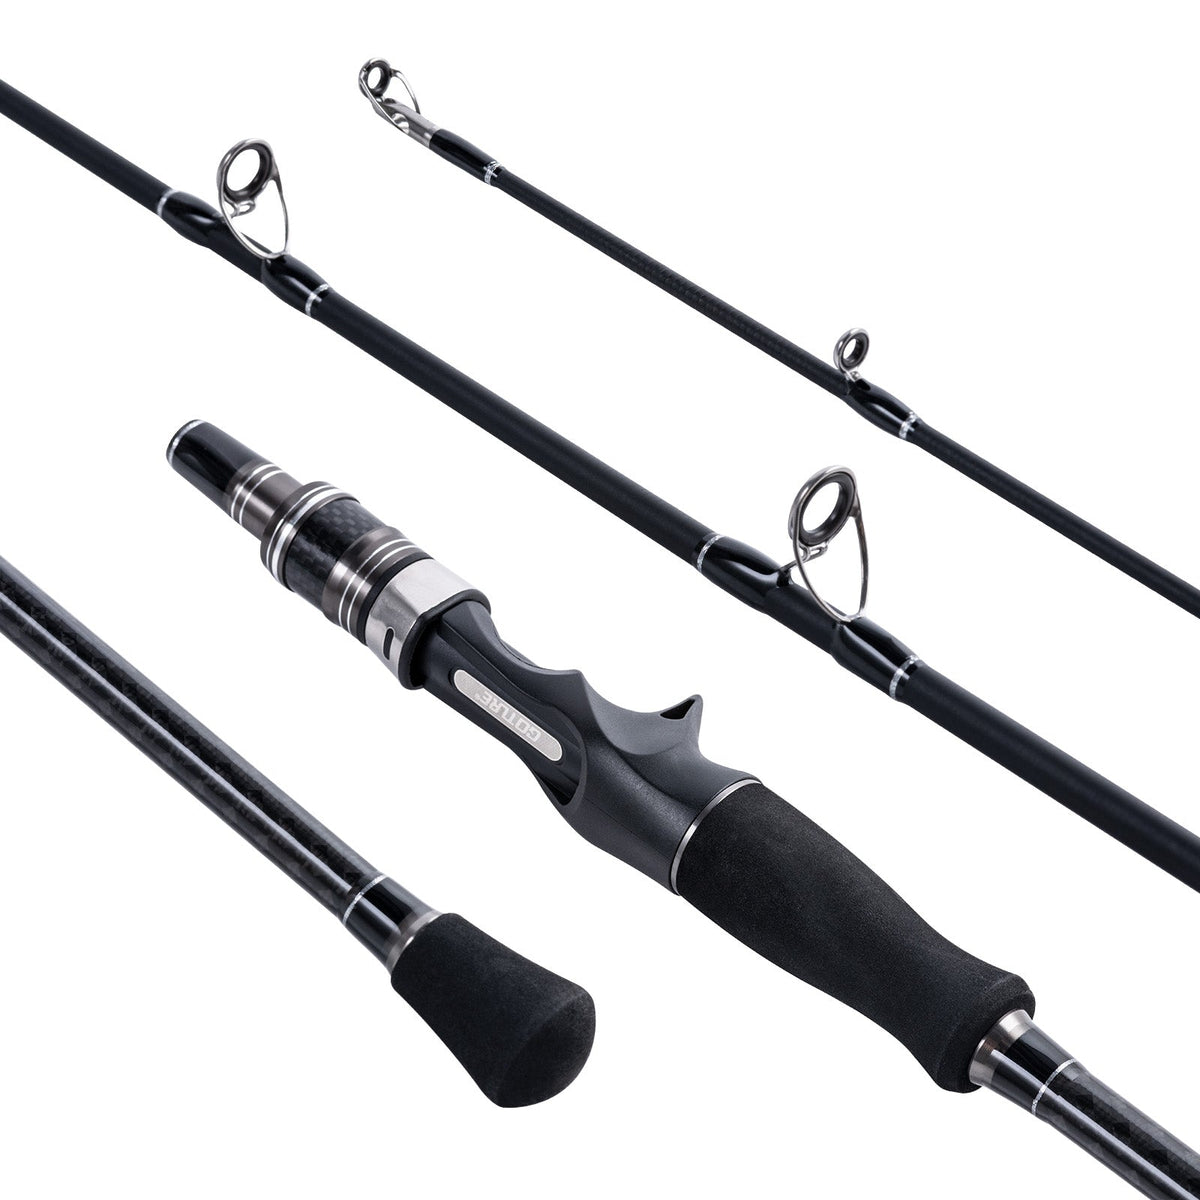 Goture Travel Jigging Rod/ Slow Pitch Jigging Rod Saltwater Freshwater  Spinning Casting Jig Rod for Salmon, Trout, bass, Stripped bass 6’0’’/6'6’’